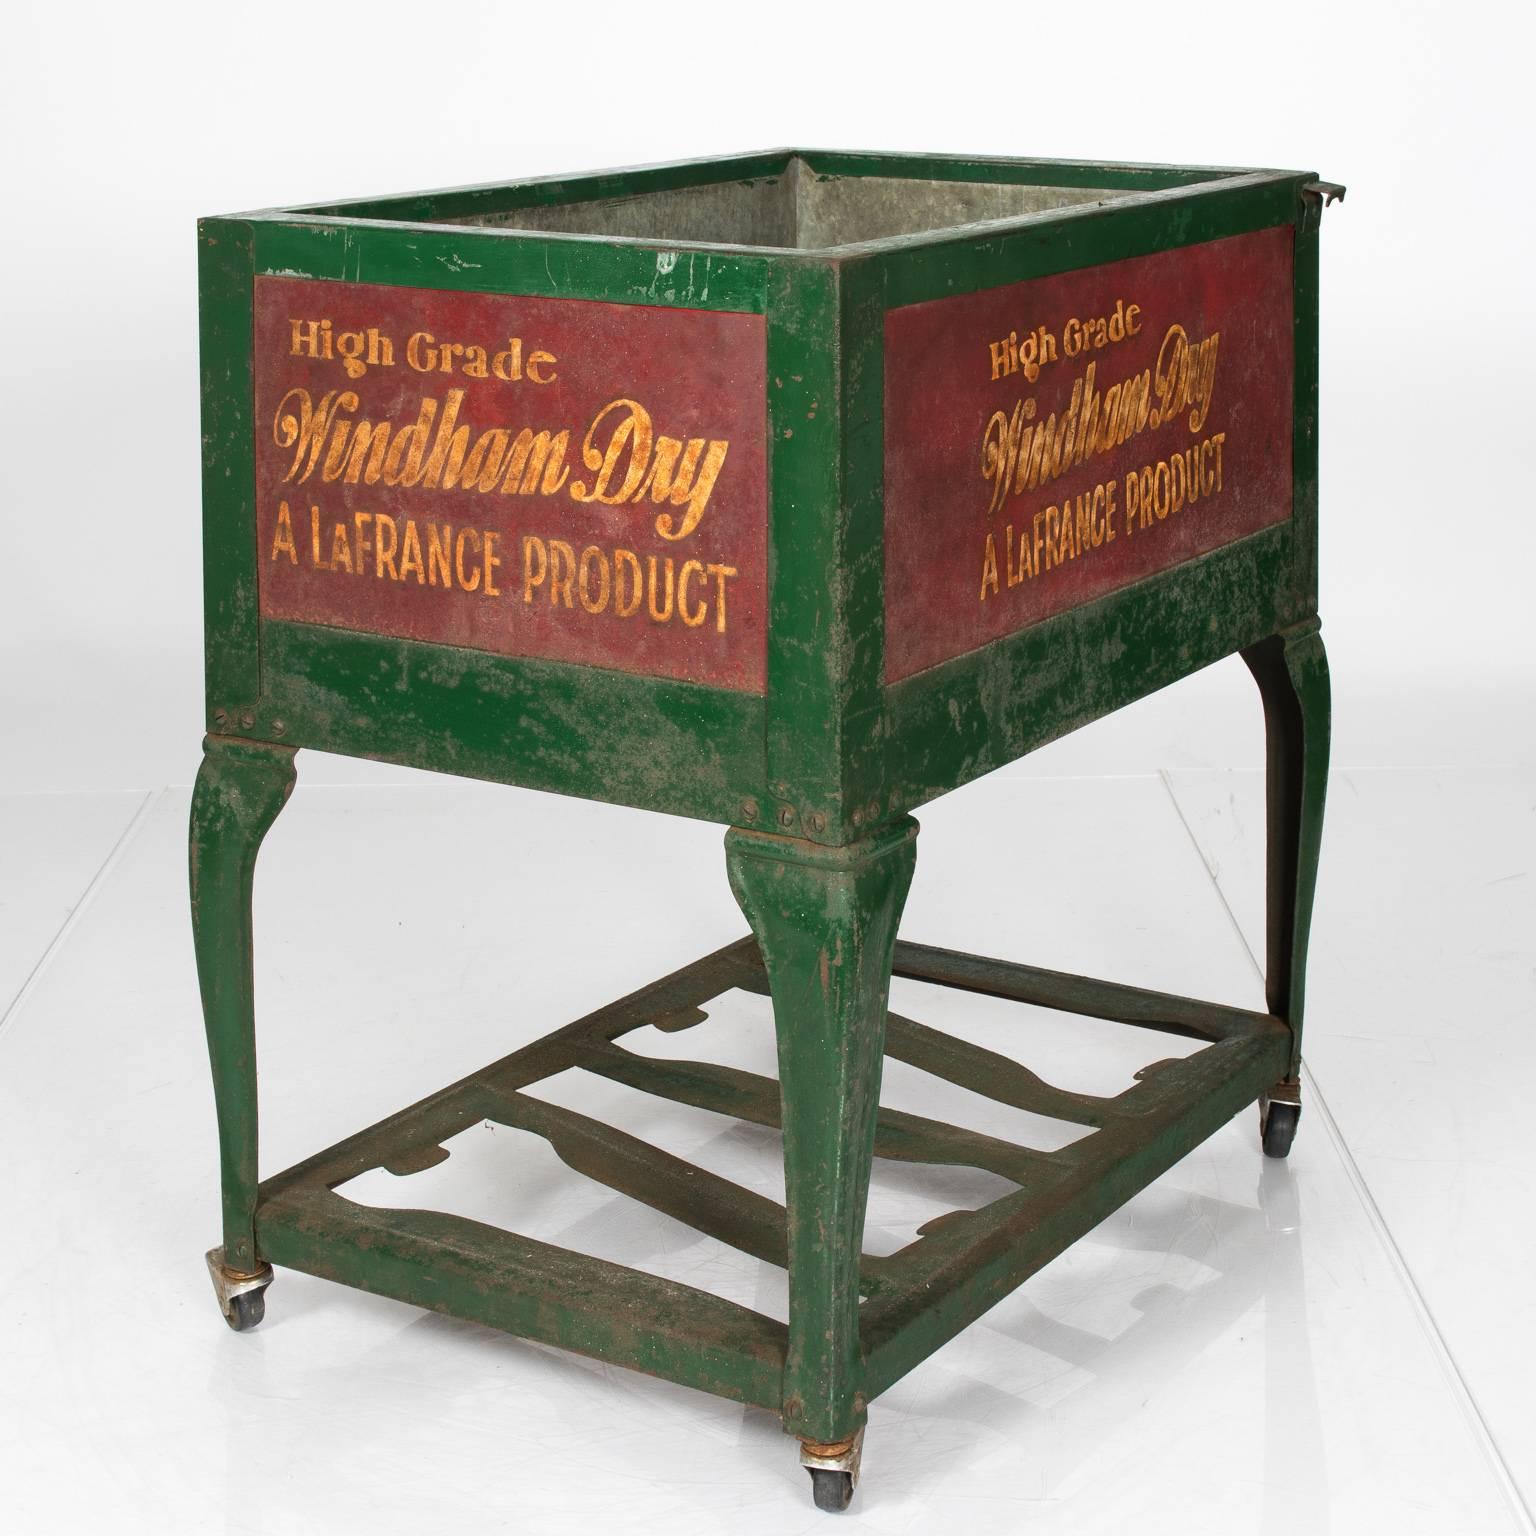 Vintage ice chest on wheels with advertising featured on the sides, circa early to mid-1900s.
 